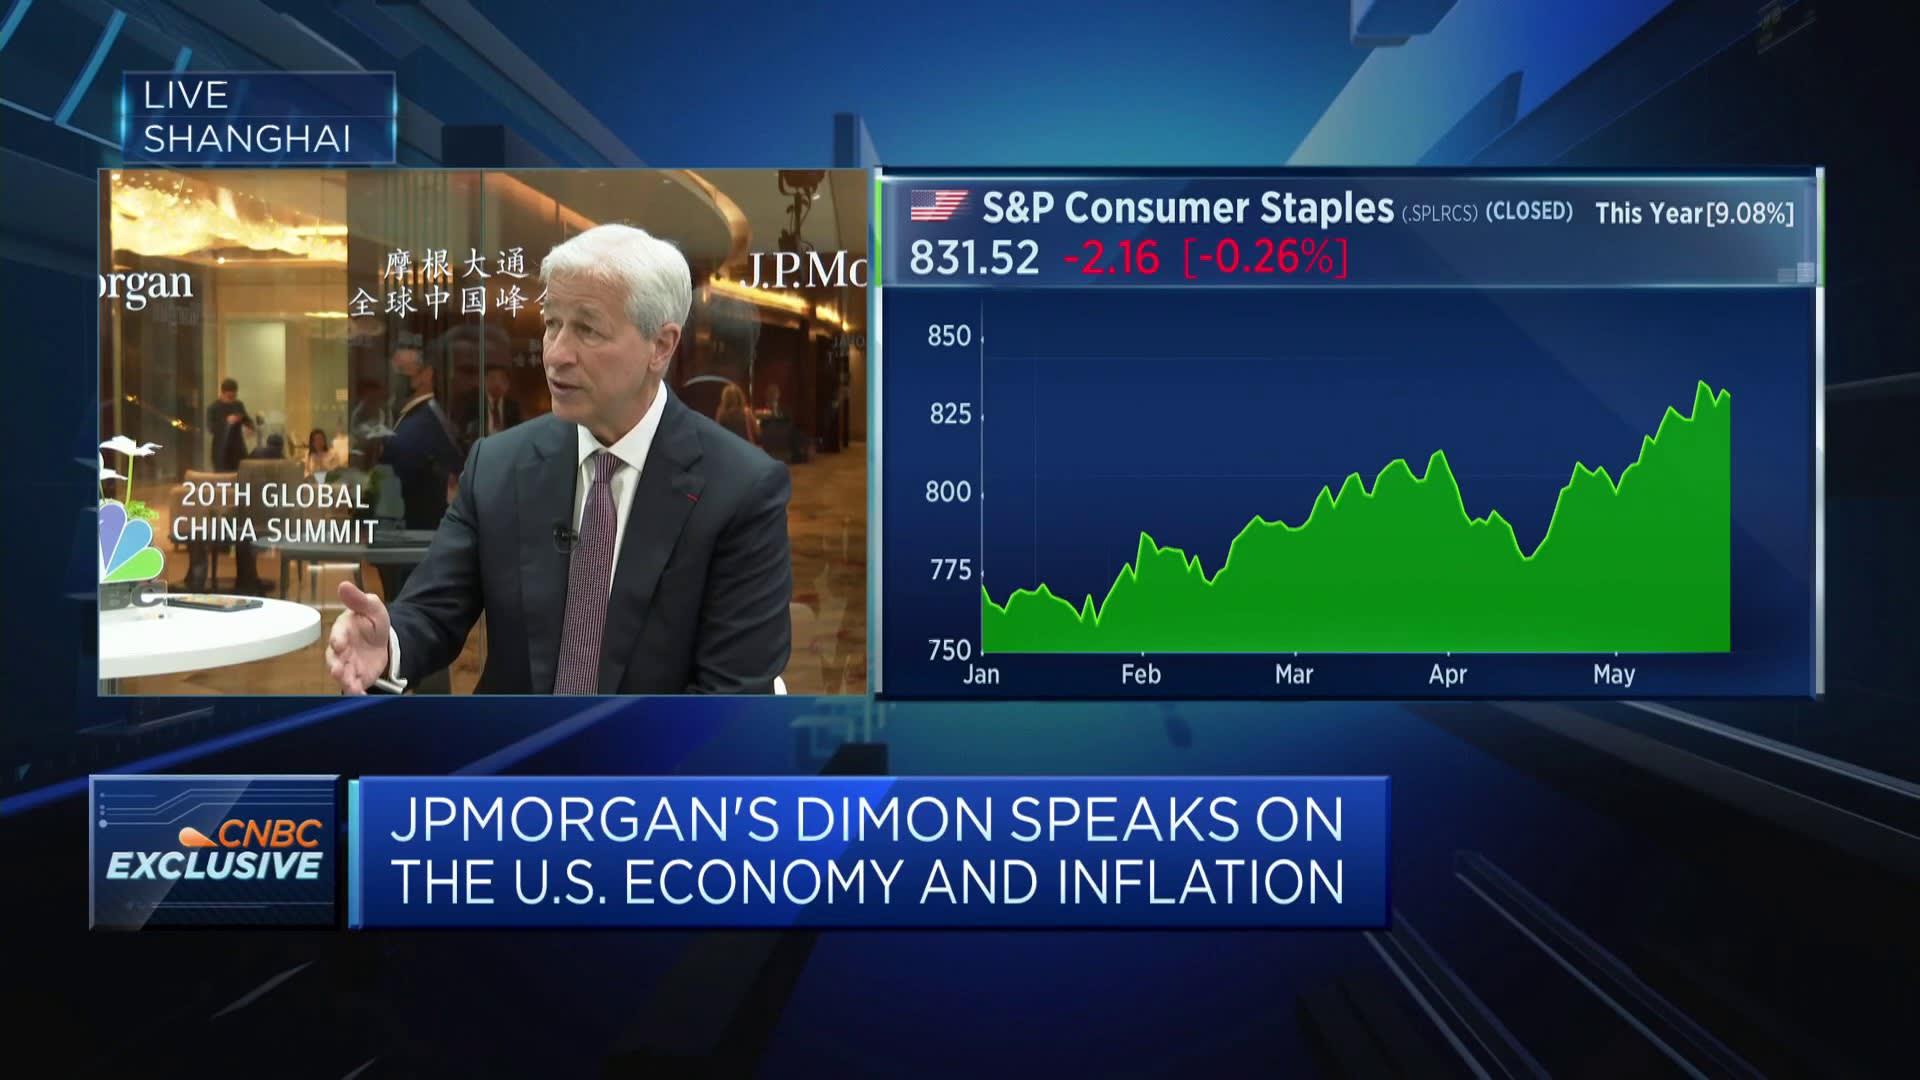 'Put me in the cautious side on this one': Jamie Dimon shares his outlook on U.S. interest rates